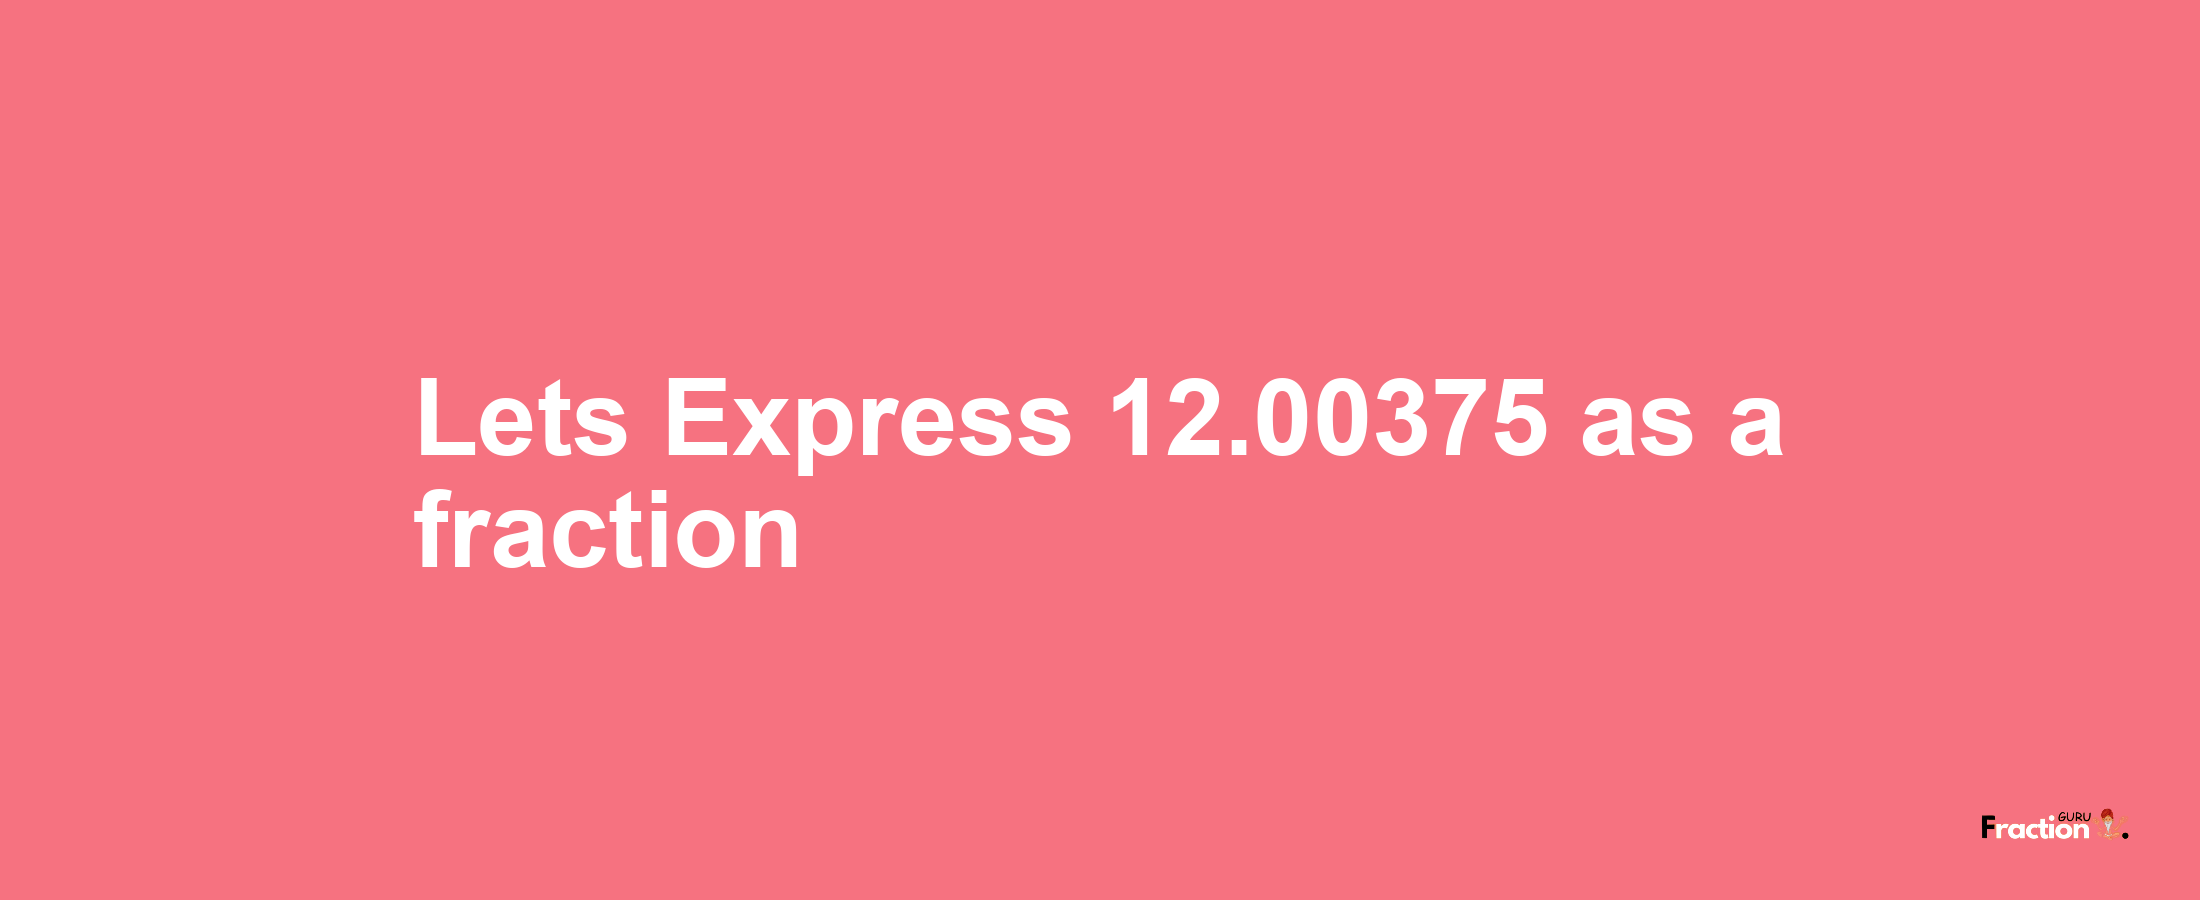 Lets Express 12.00375 as afraction